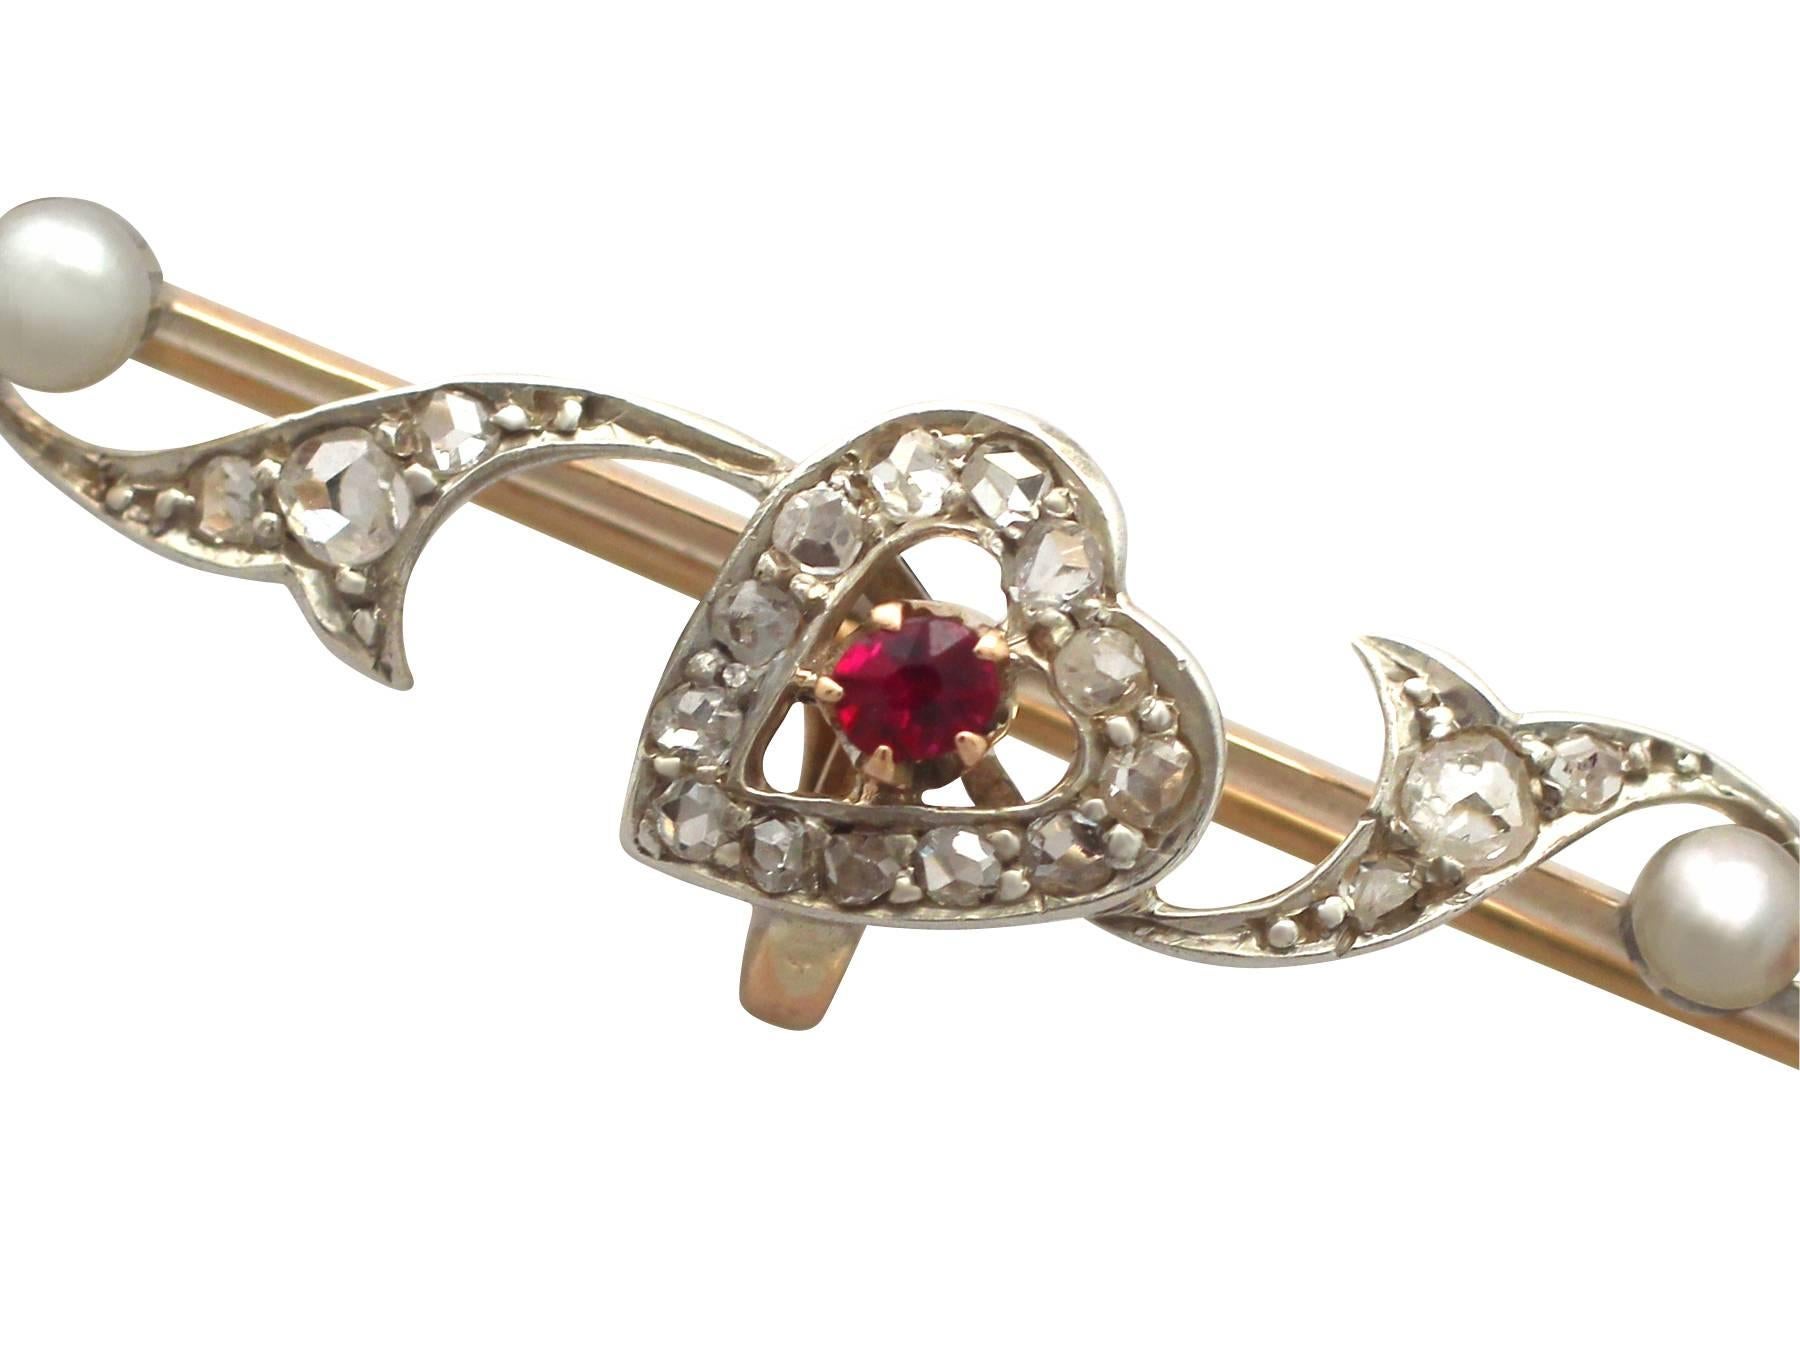 A fine and impressive antique Victorian 0.52 carat natural ruby, 0.29 carat diamond and seed pearl, 14 karat yellow gold and 14k white gold set bar style brooch; part of our diverse antique jewelry / estate jewelry collections

This fine and